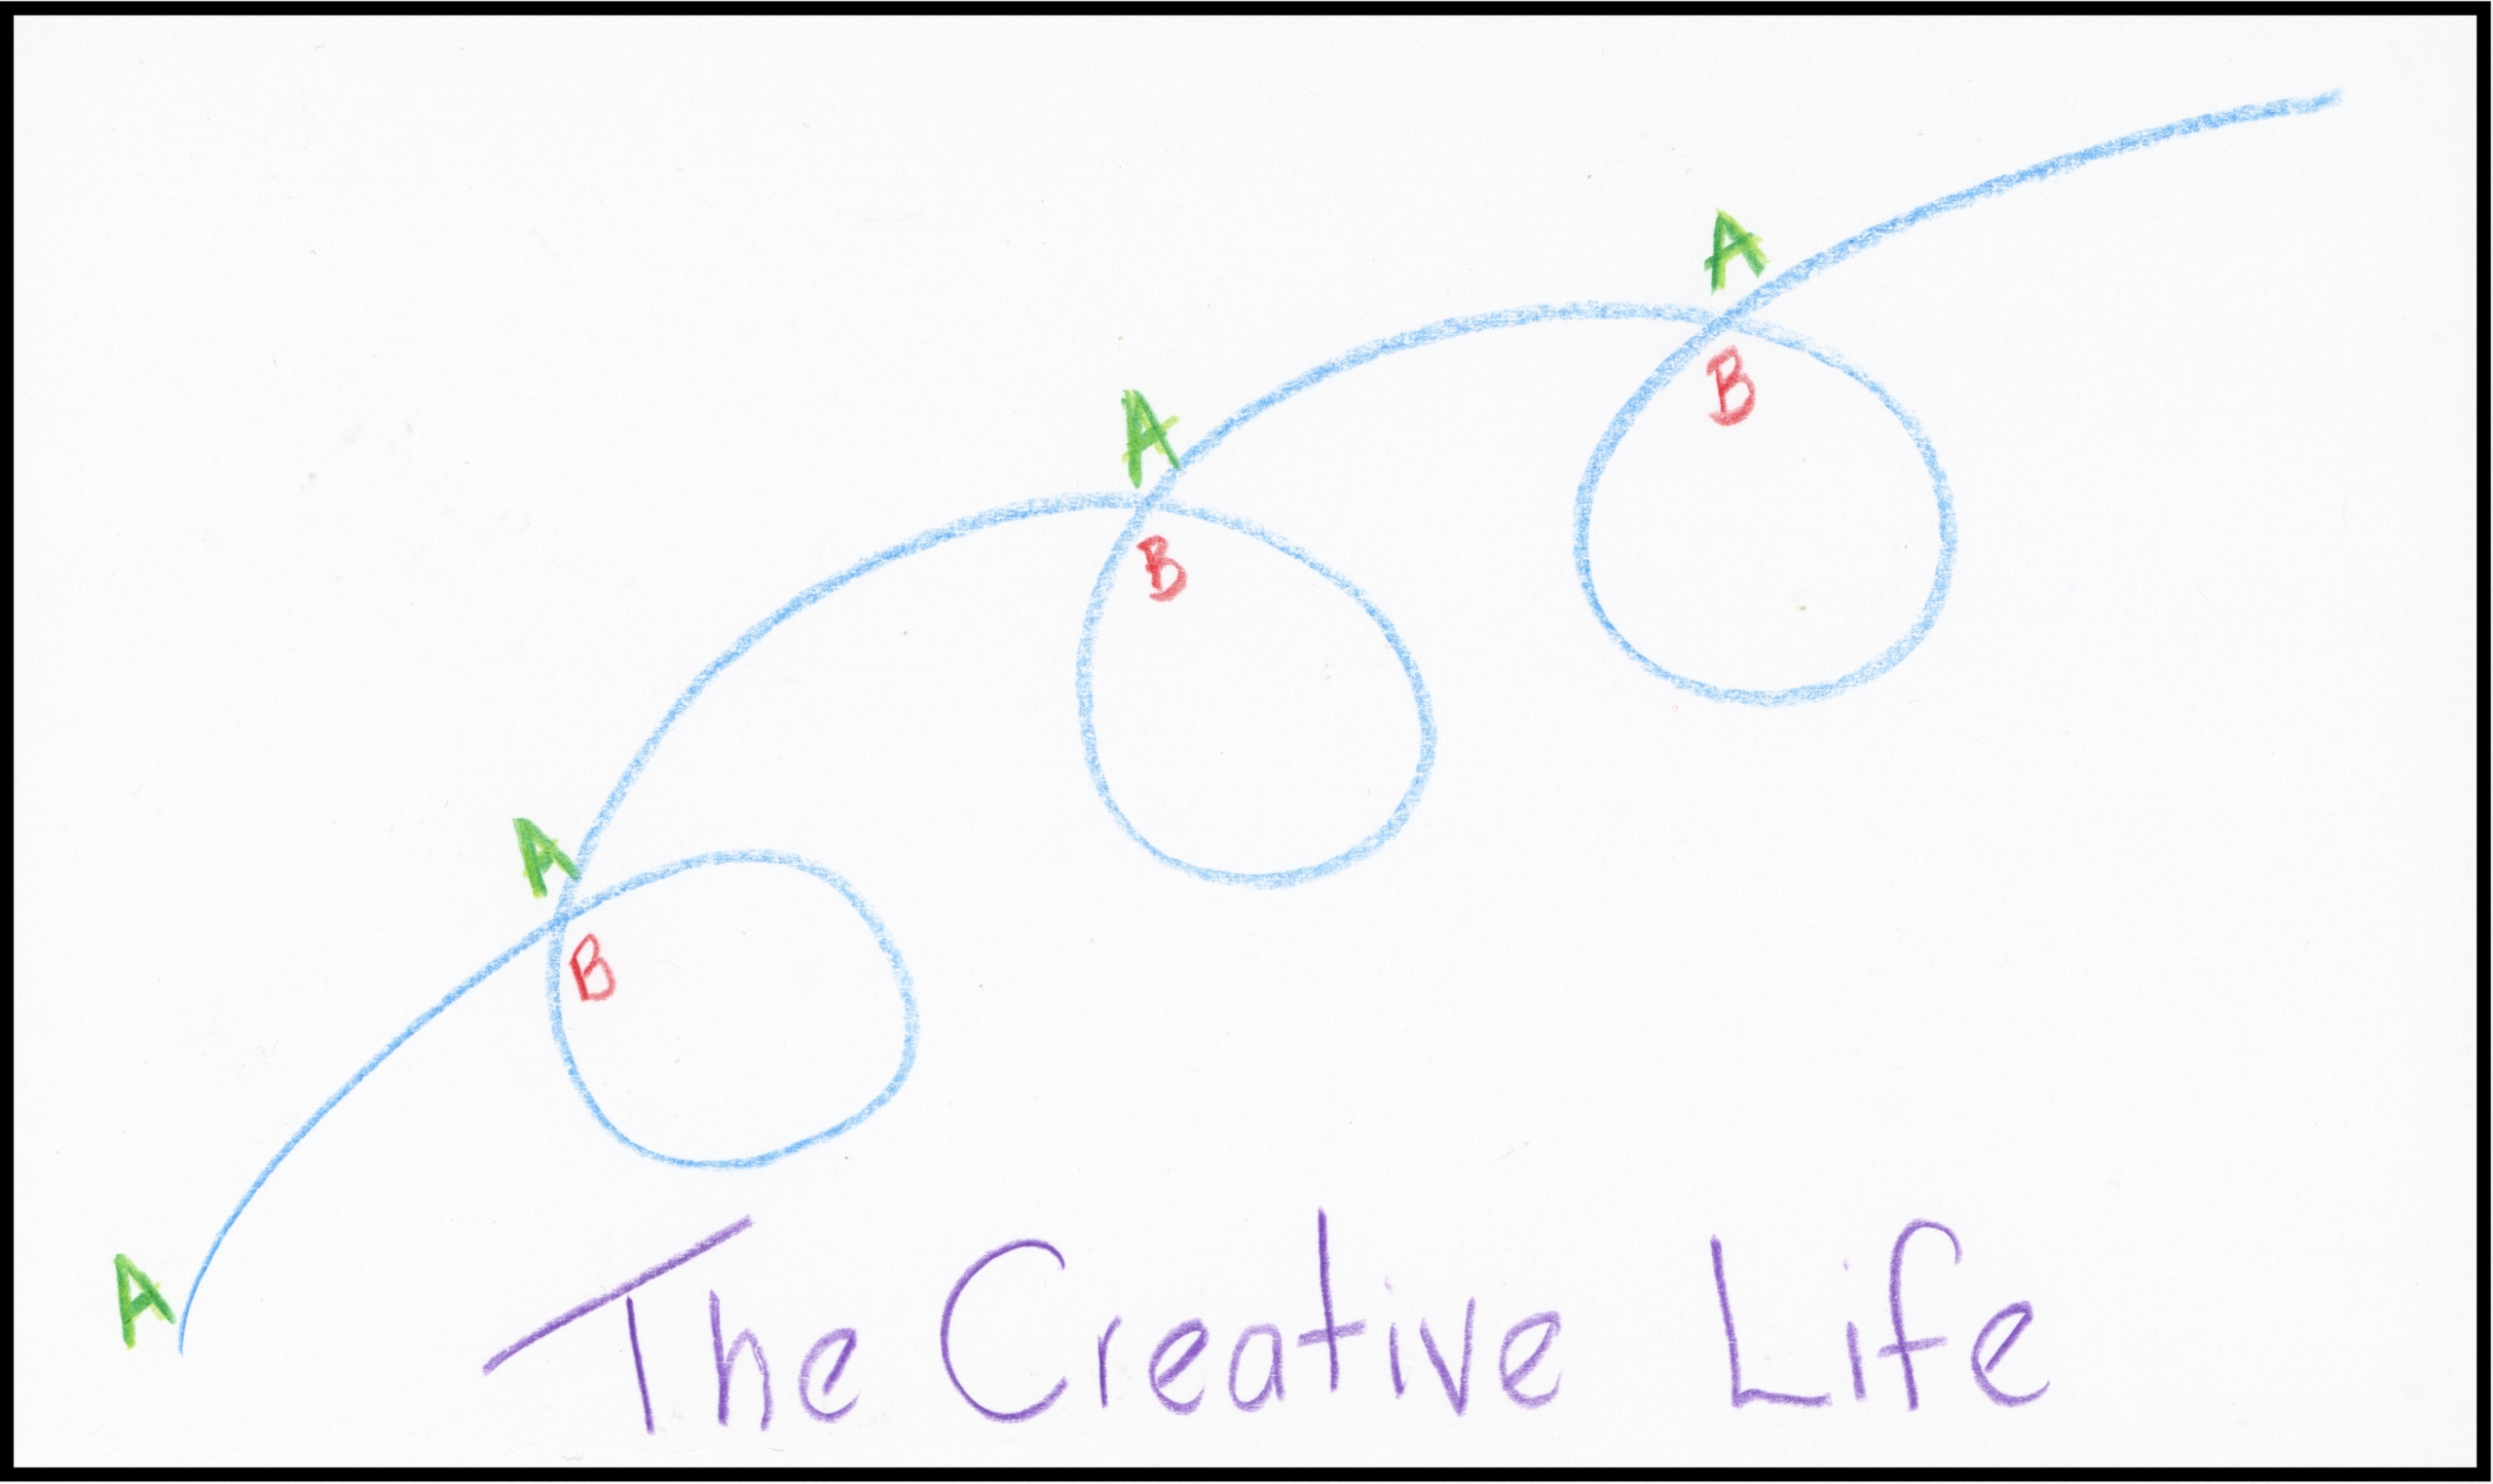 a drawing of a spiral depicting how our path is in loops moving from point a to point b to get unstuck